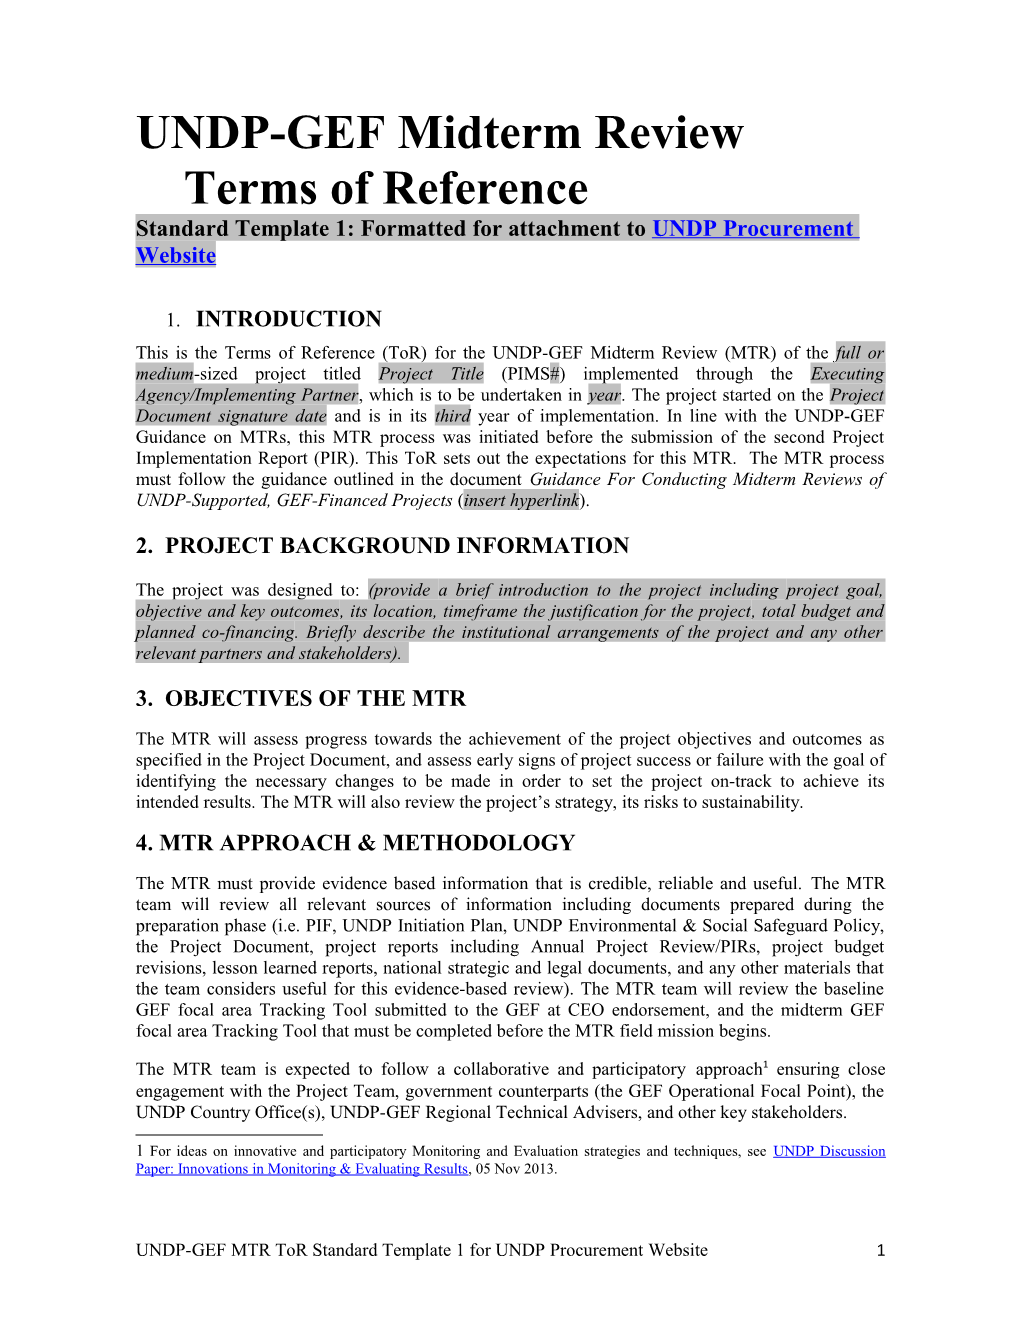 UNDP-GEF Midterm Review Terms of Reference